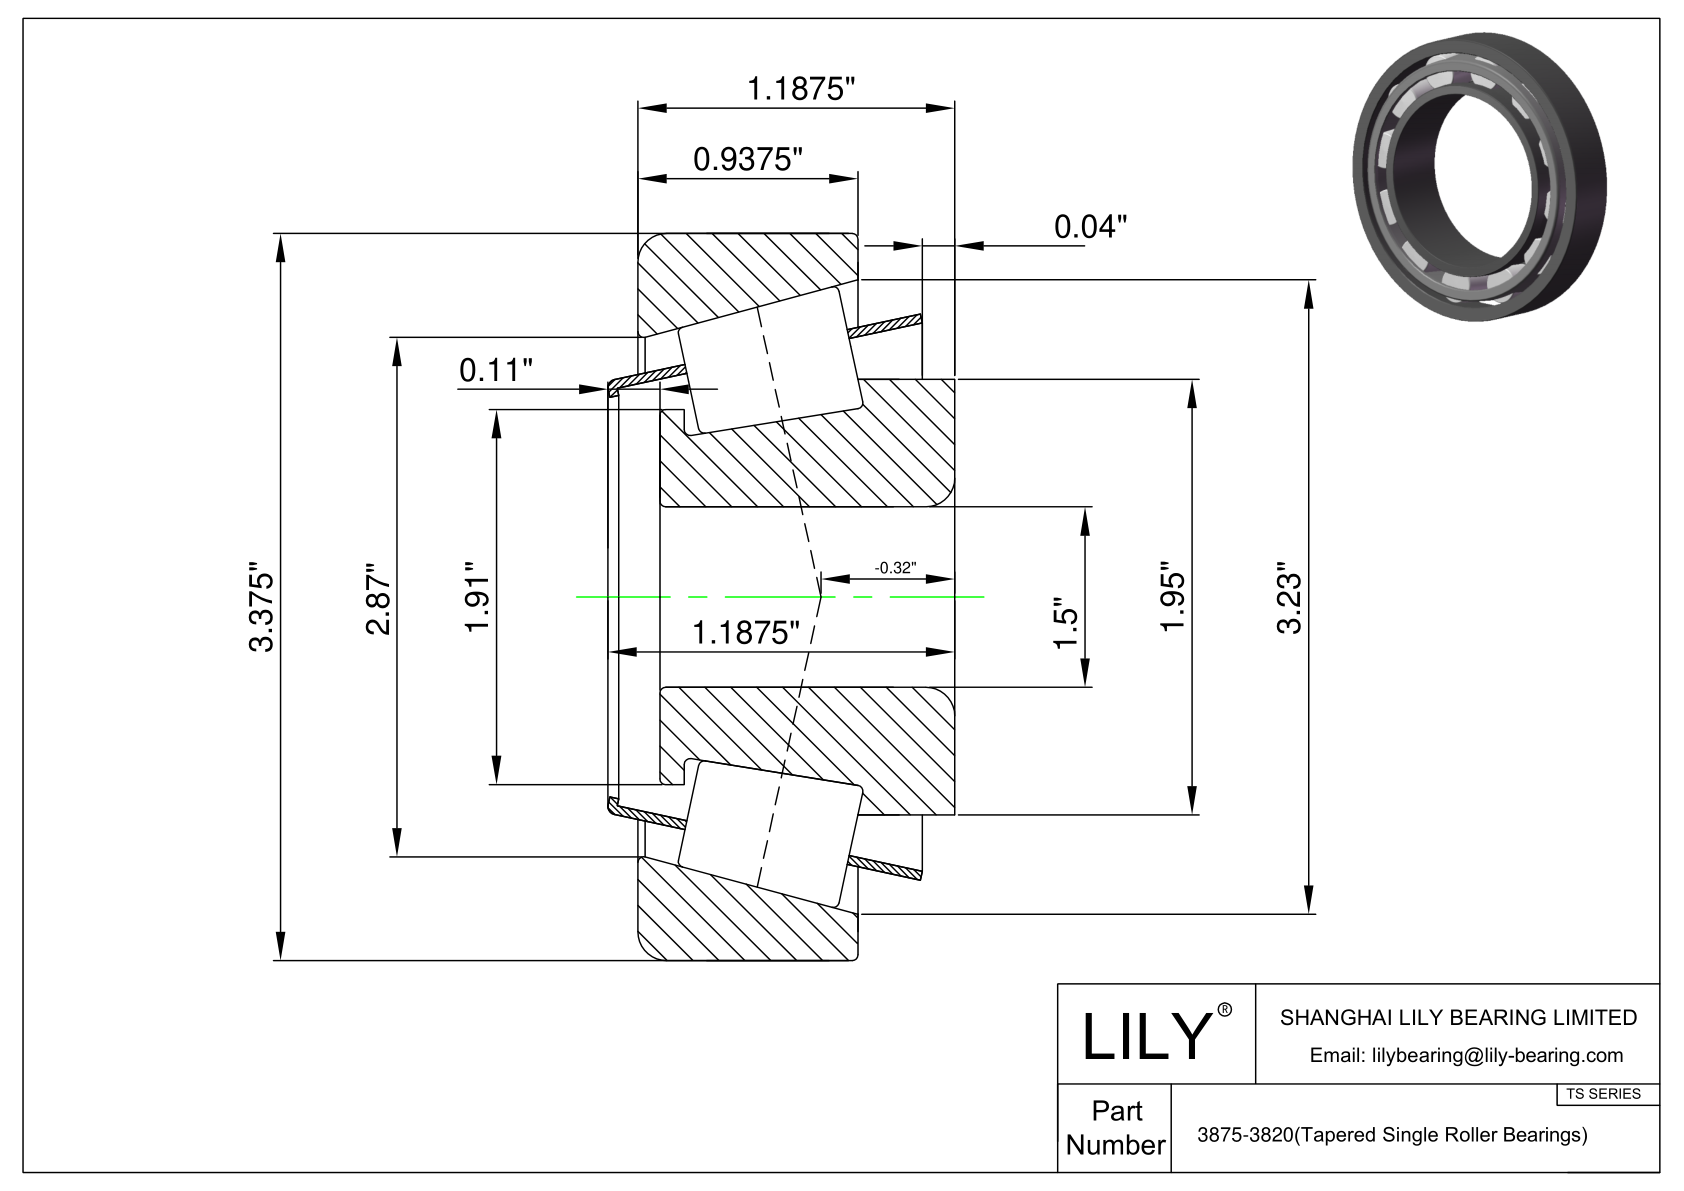 3875-3820 TS (Tapered Single Roller Bearings) (Imperial) cad drawing